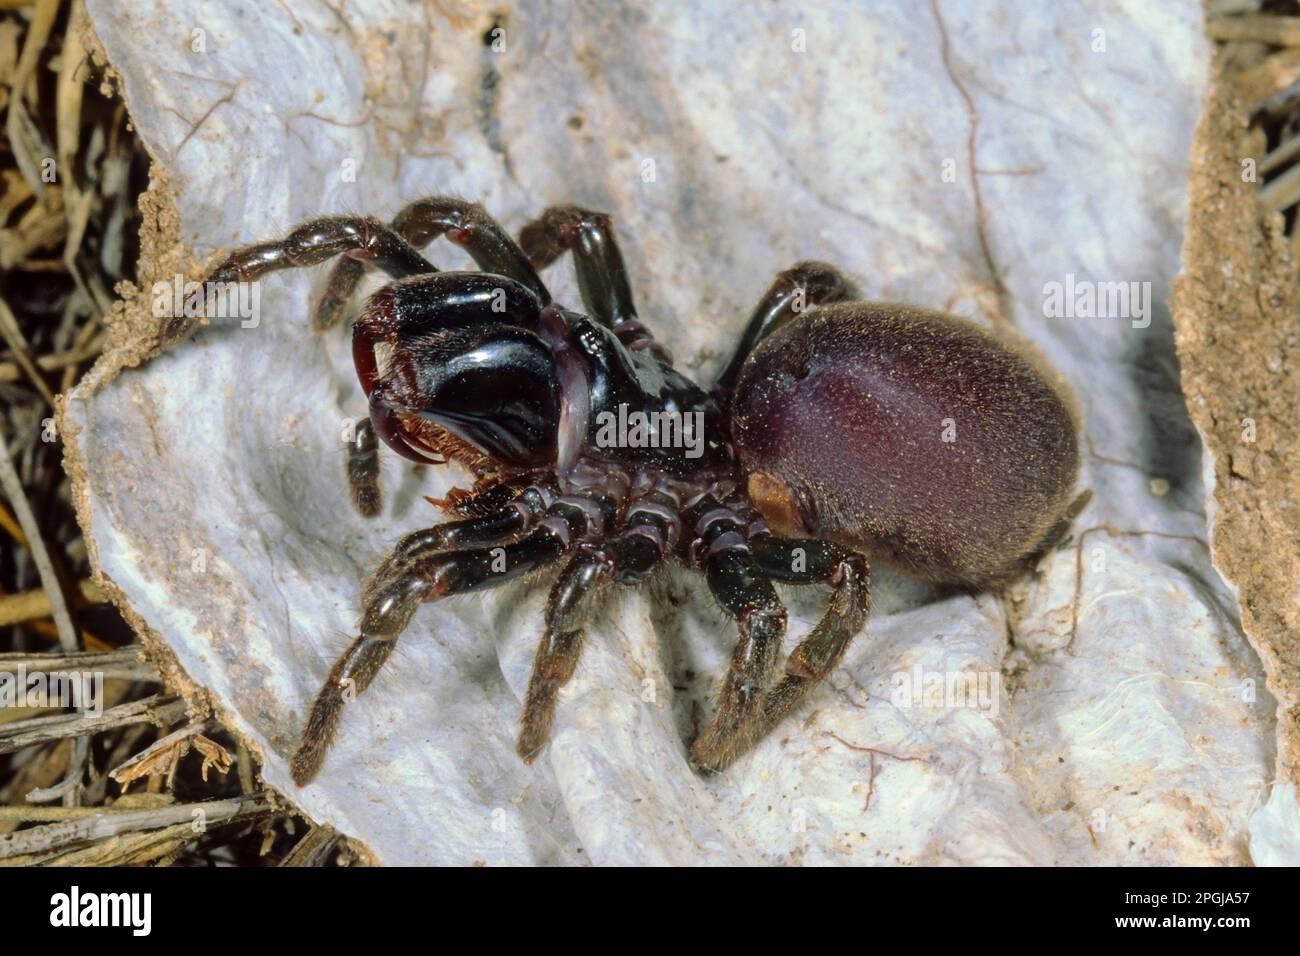 purse-web spider (Atypus affinis), sitting on open catching tube, Germany Stock Photo